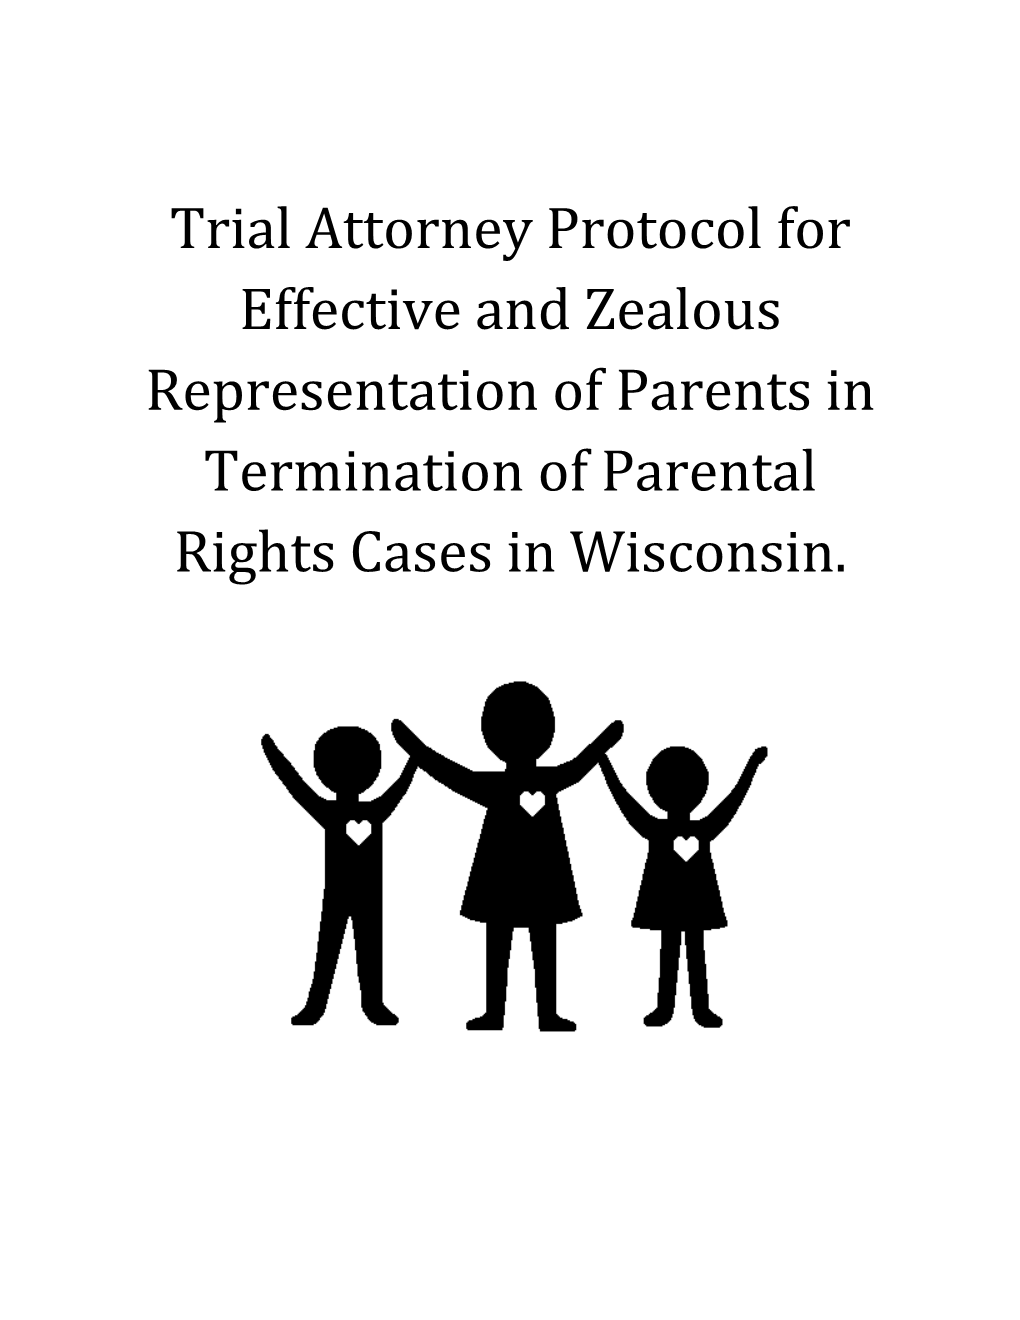 Trial Attorney Protocol for Effective and Zealous Representation of Parents in Termination